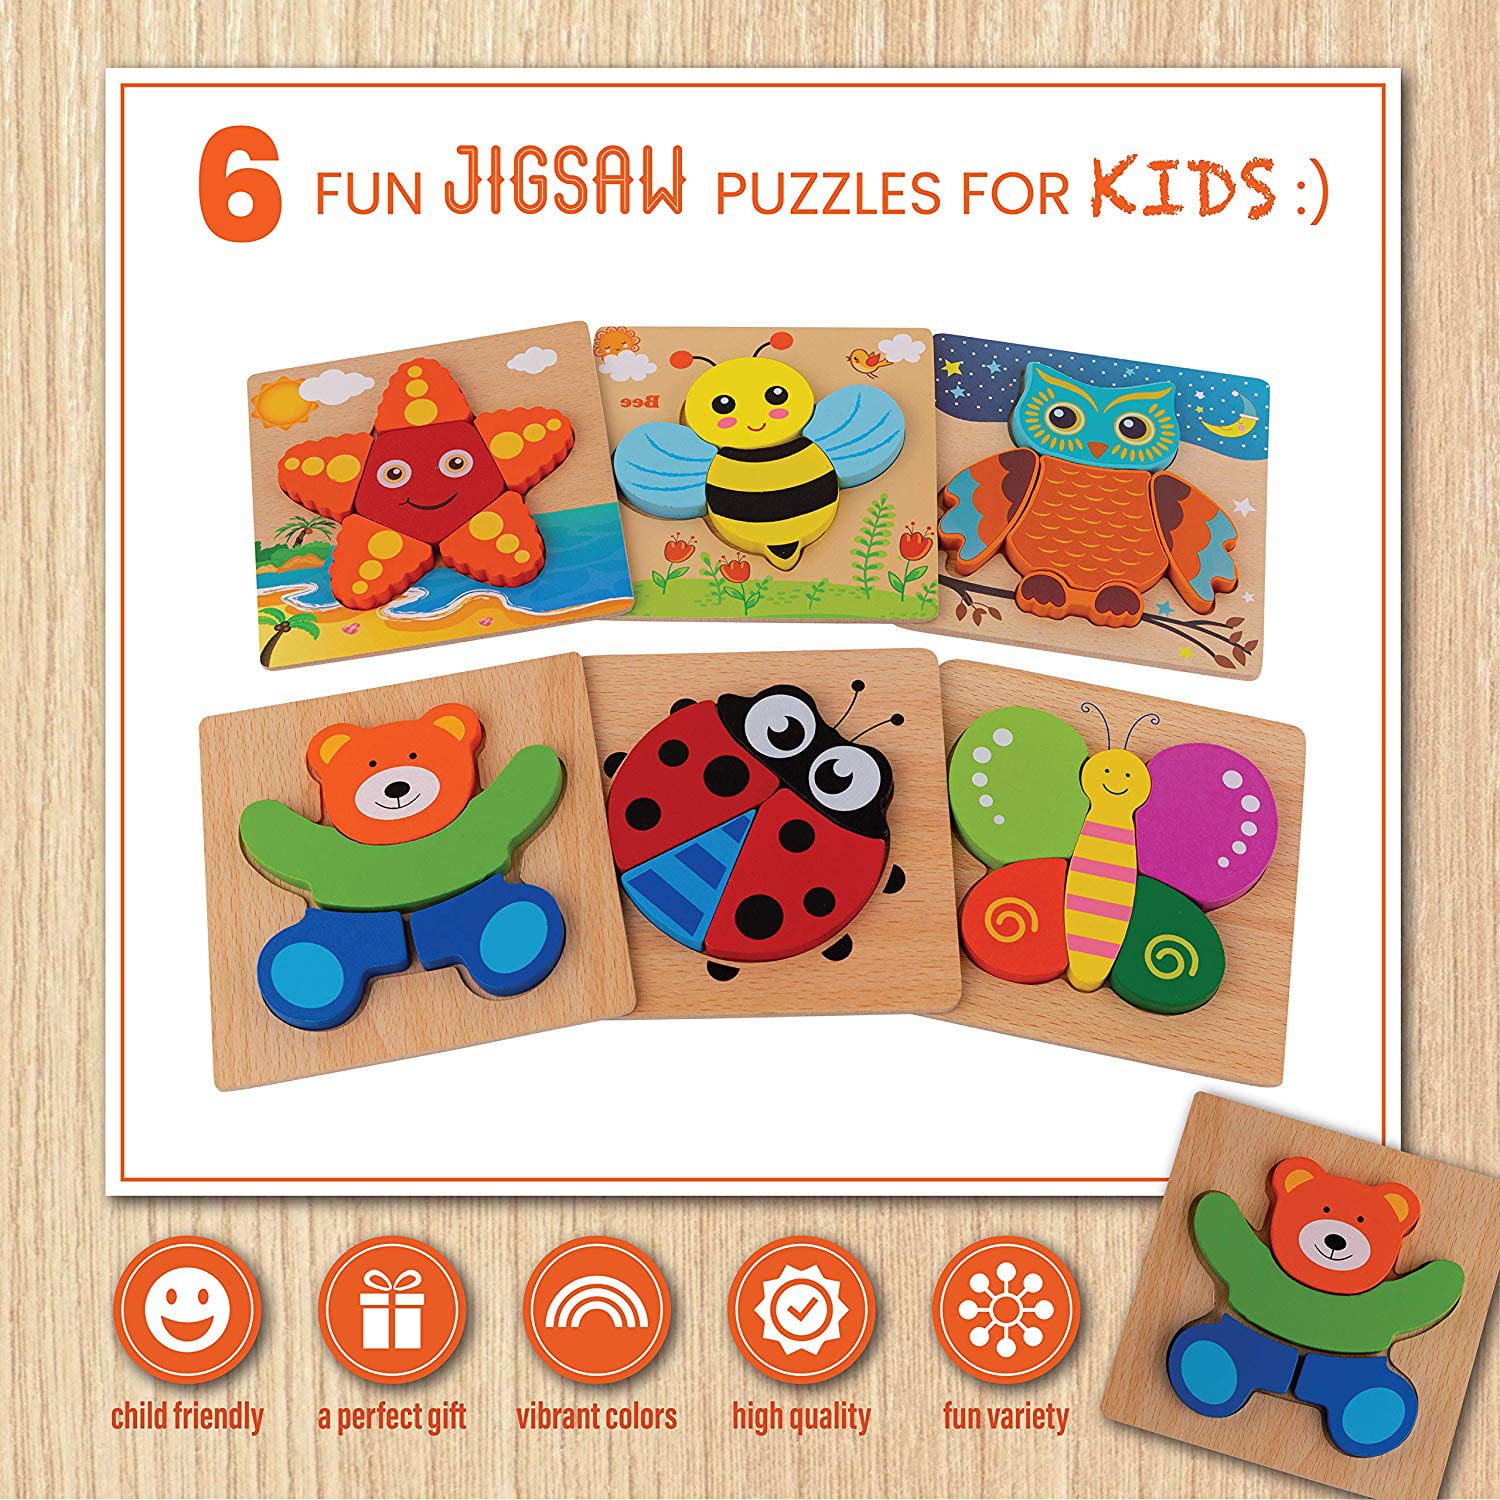 for Kids Age 3 to 5 Bright & Vibrant Colors & Shapes Pack of 14 Toy To Enjoy Wooden Chunky Animal Jigsaw Puzzle Peg Puzzle Toy for Toddlers 